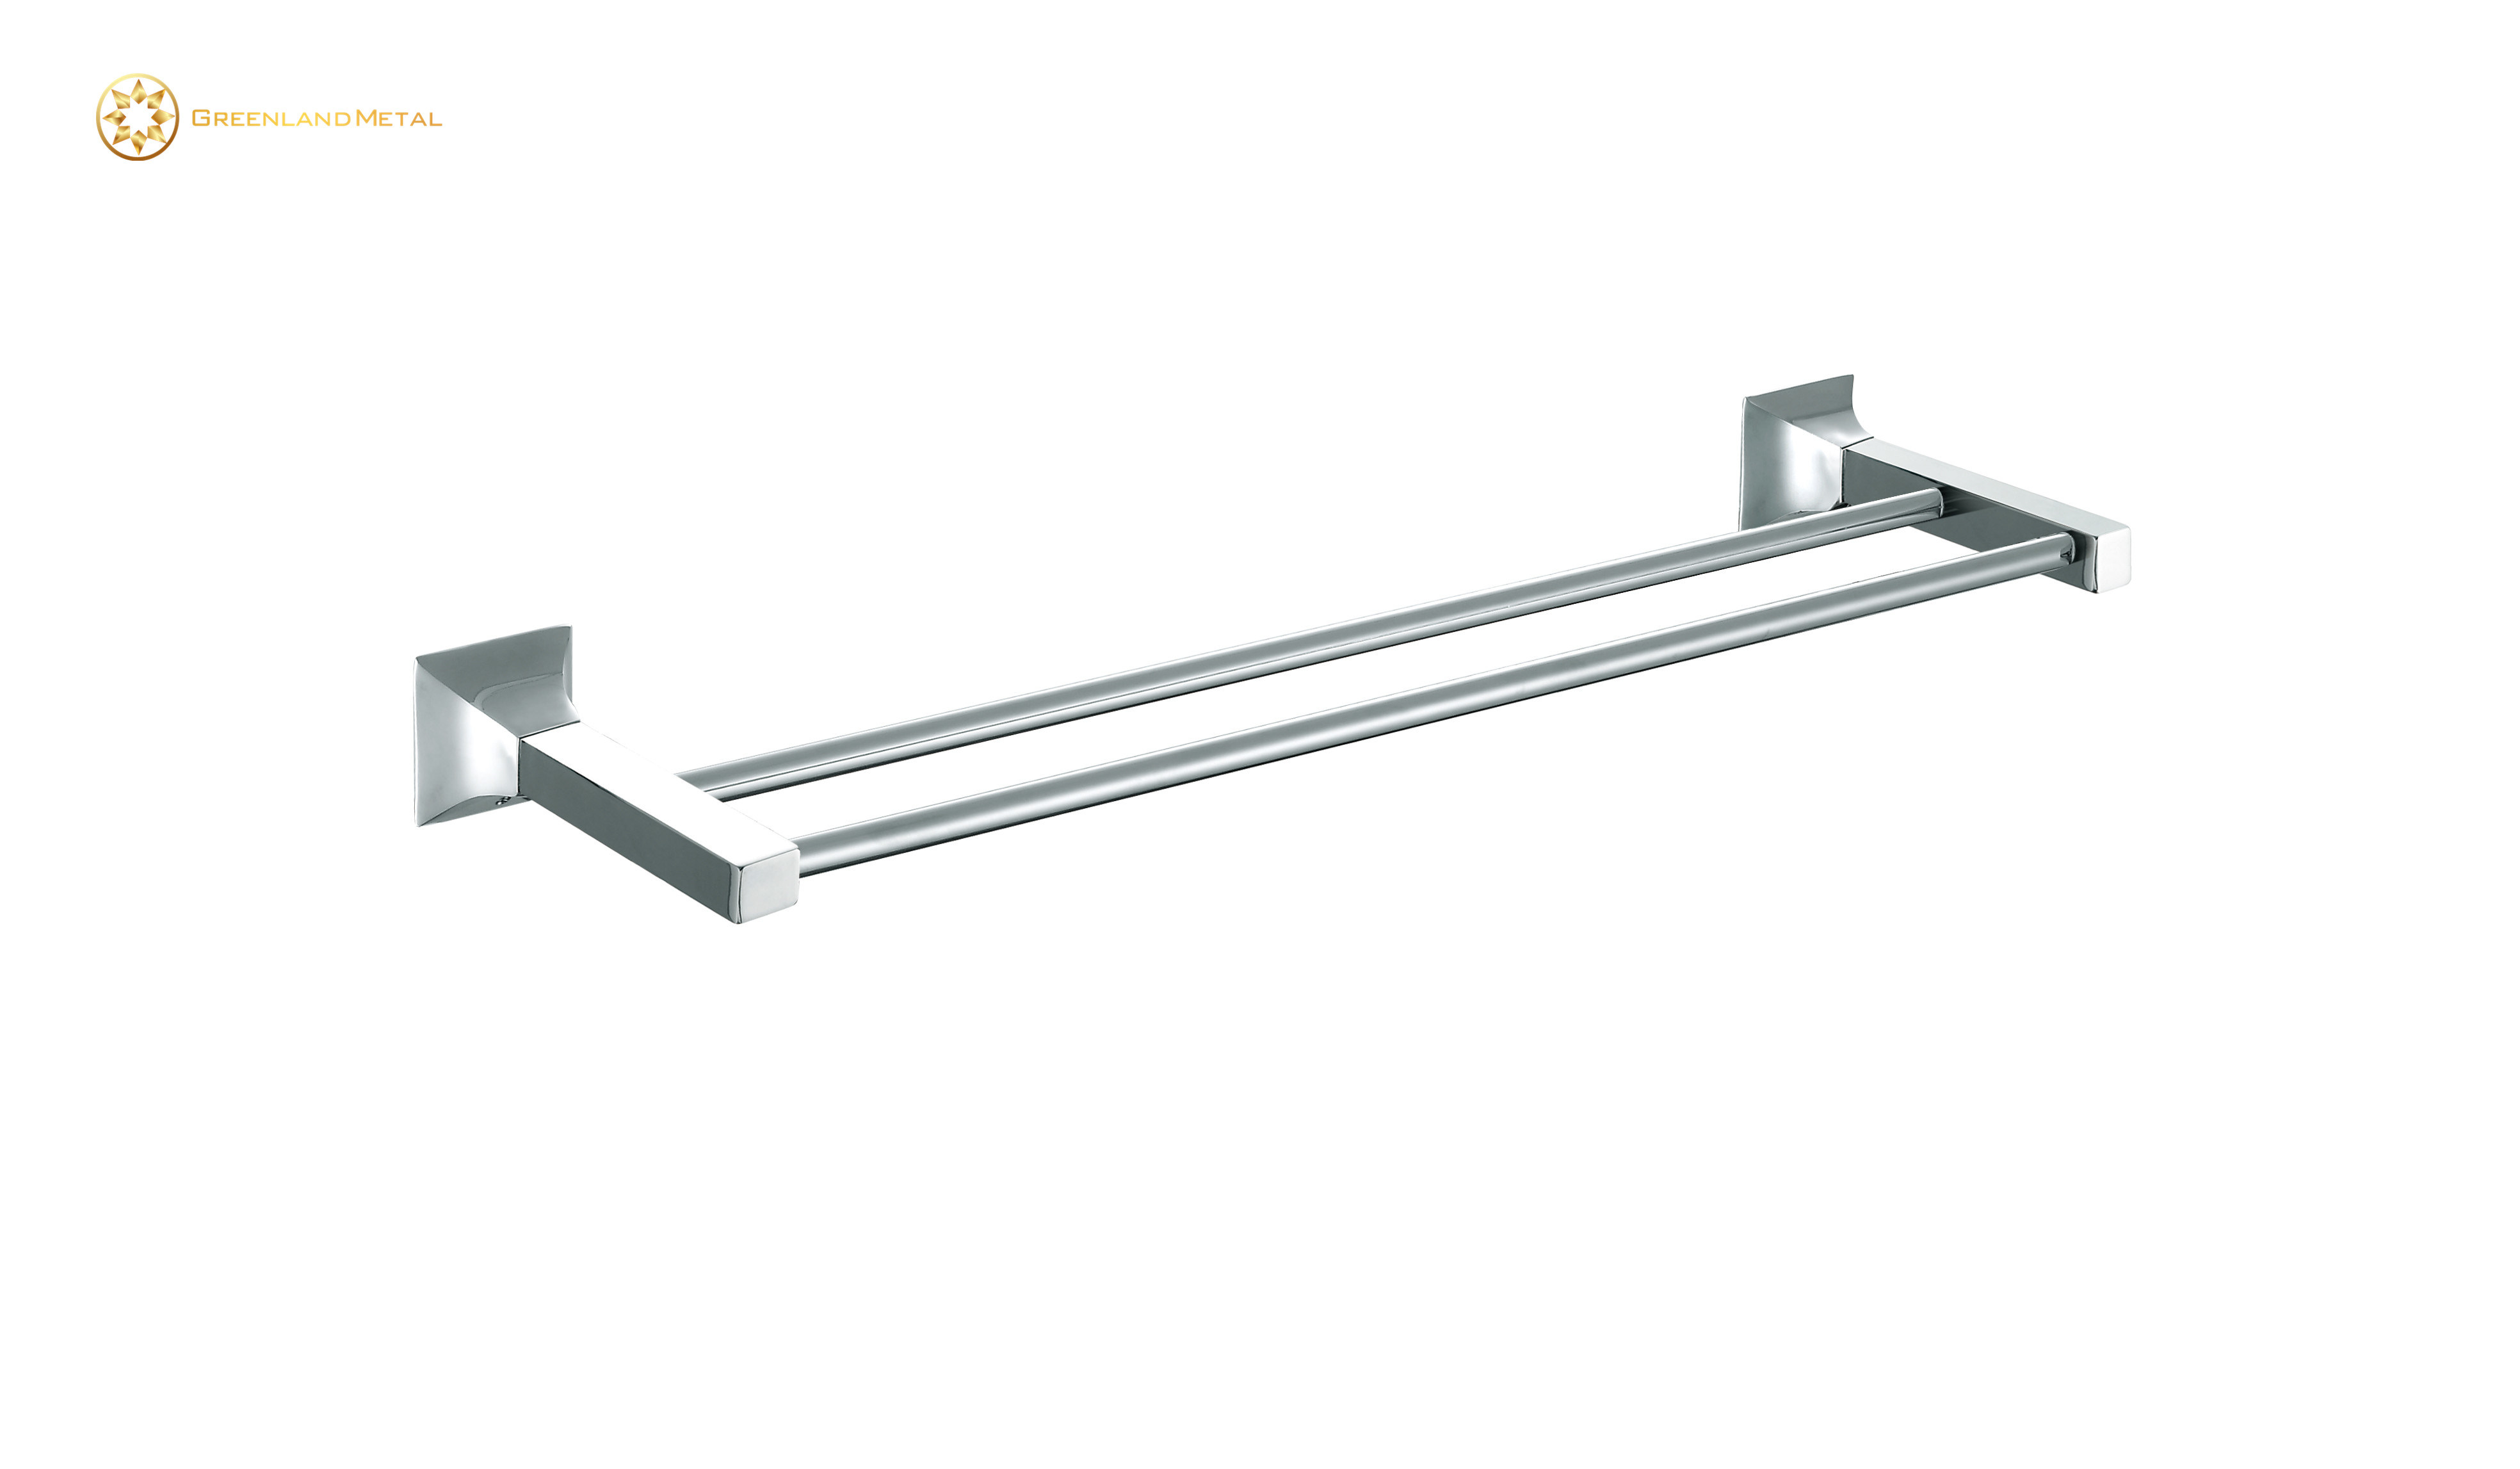 /proimages/2f0j00JwTtAWjnpybL/wall-mounted-towel-rack-with-double-track.jpg